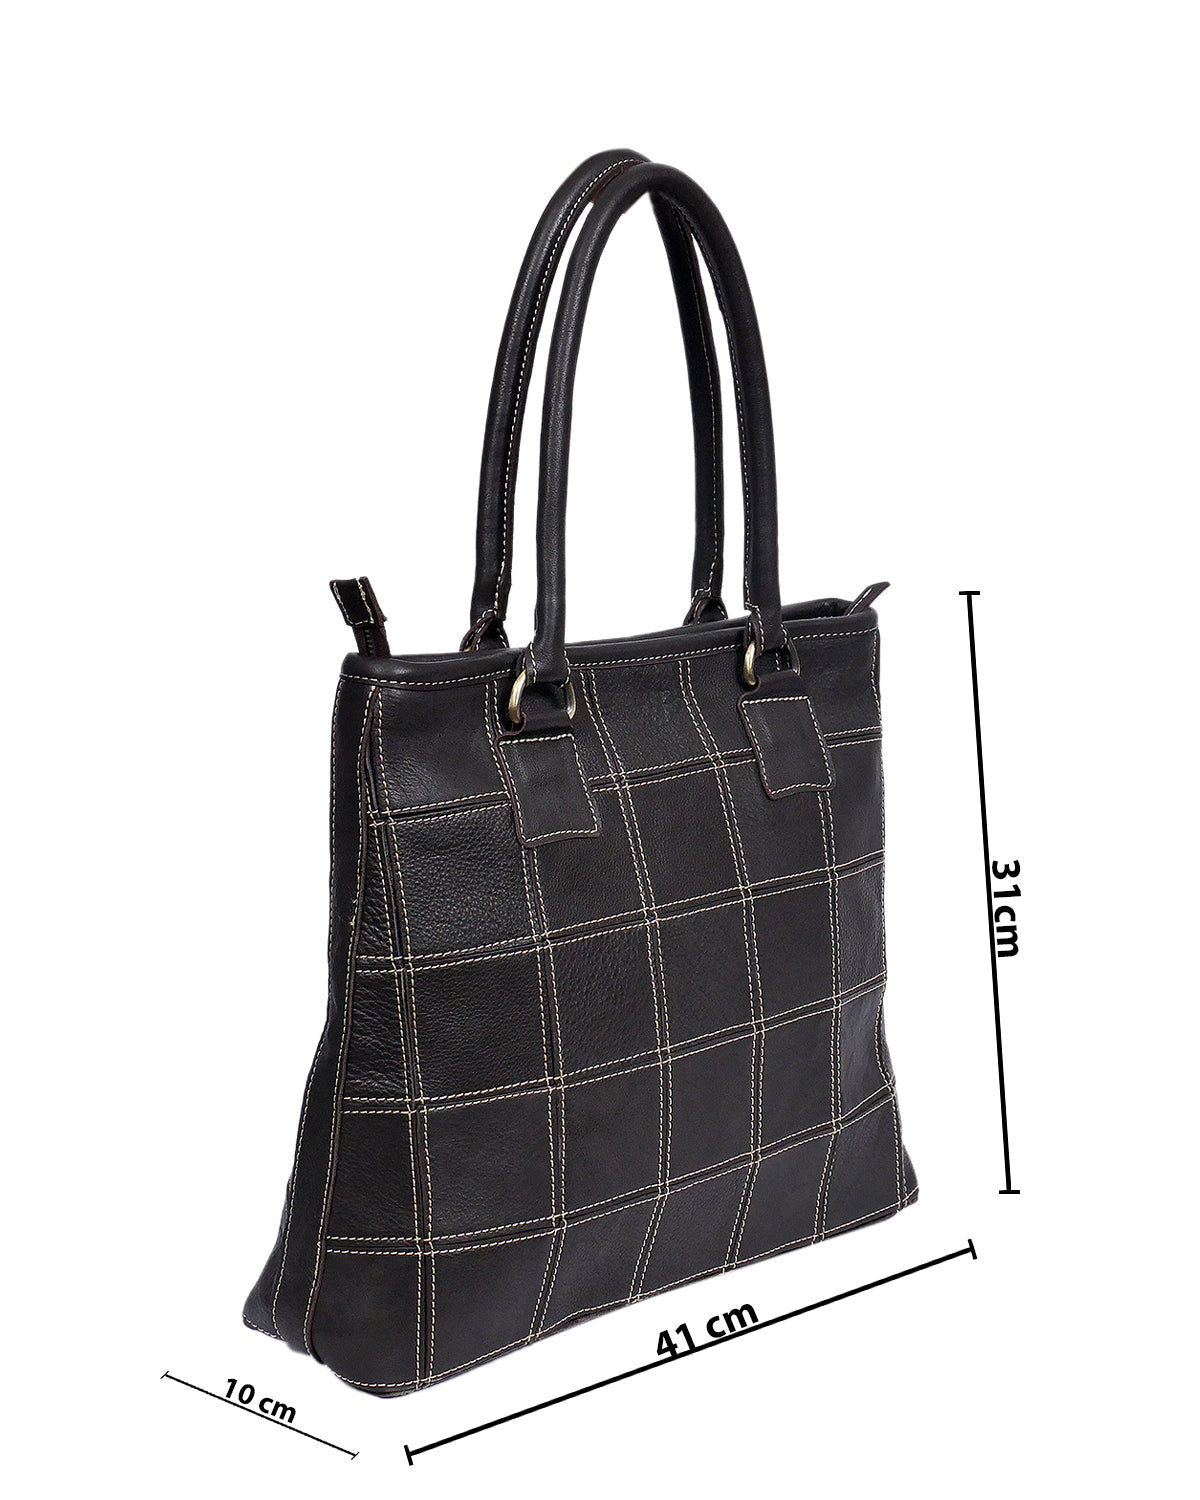 Elevate Your Style with our Black Leather Tote Bag - Classic Elegance with White Stitching. - CELTICINDIA